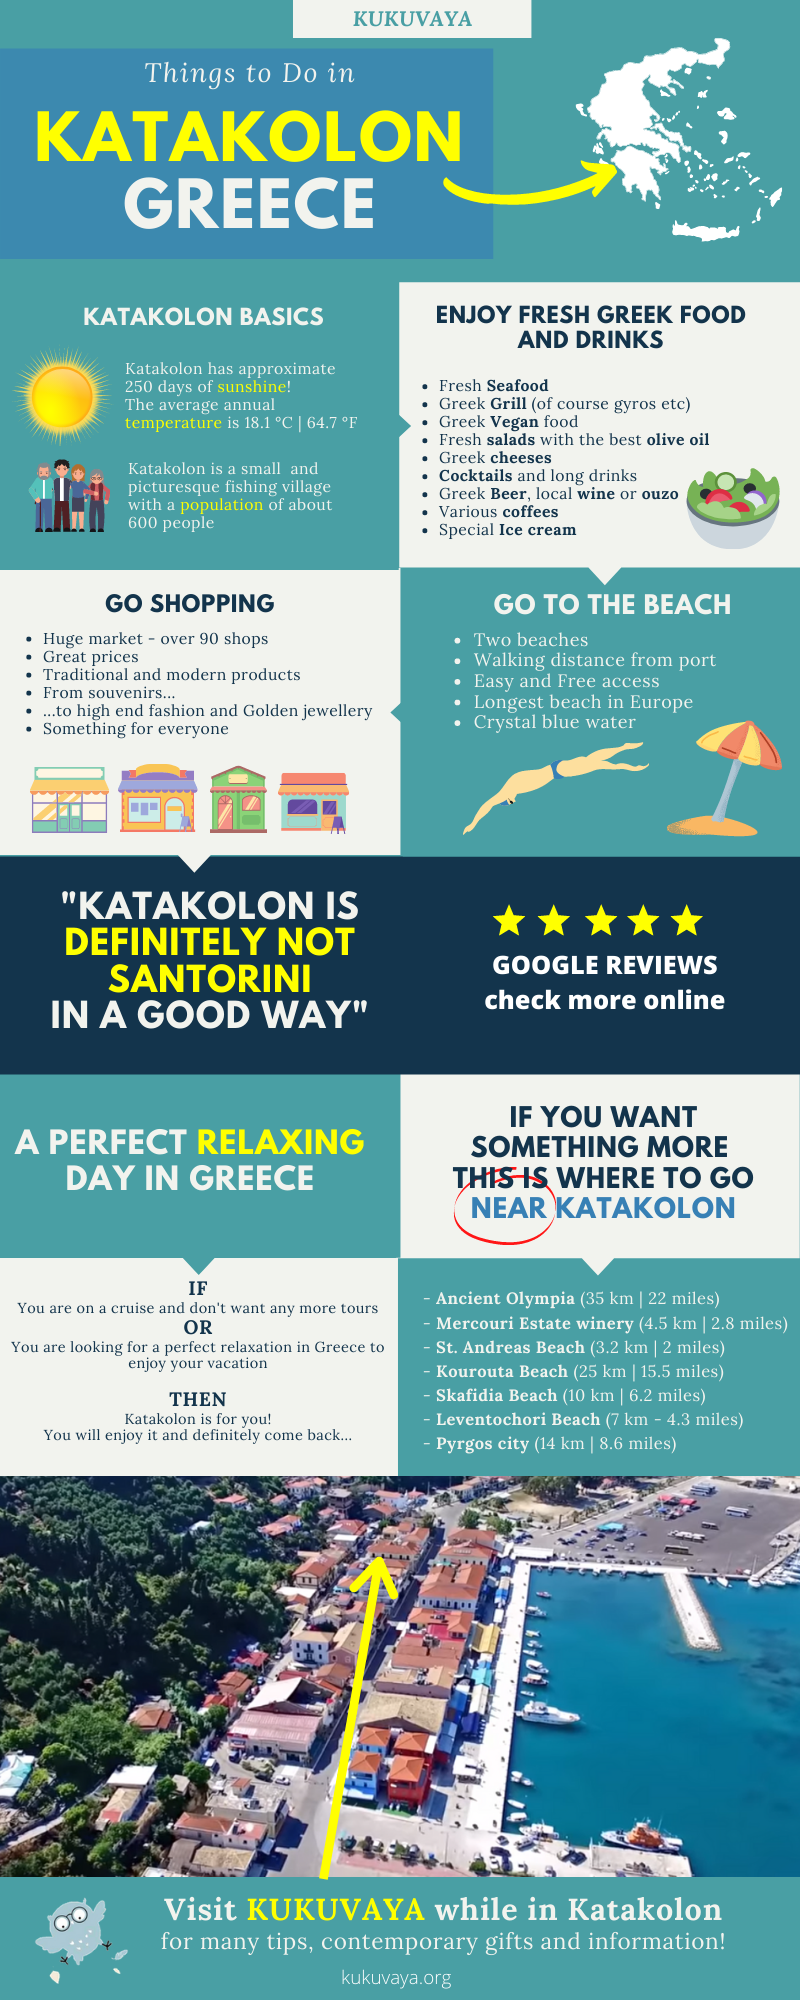 Katakolon things to do in one infographic